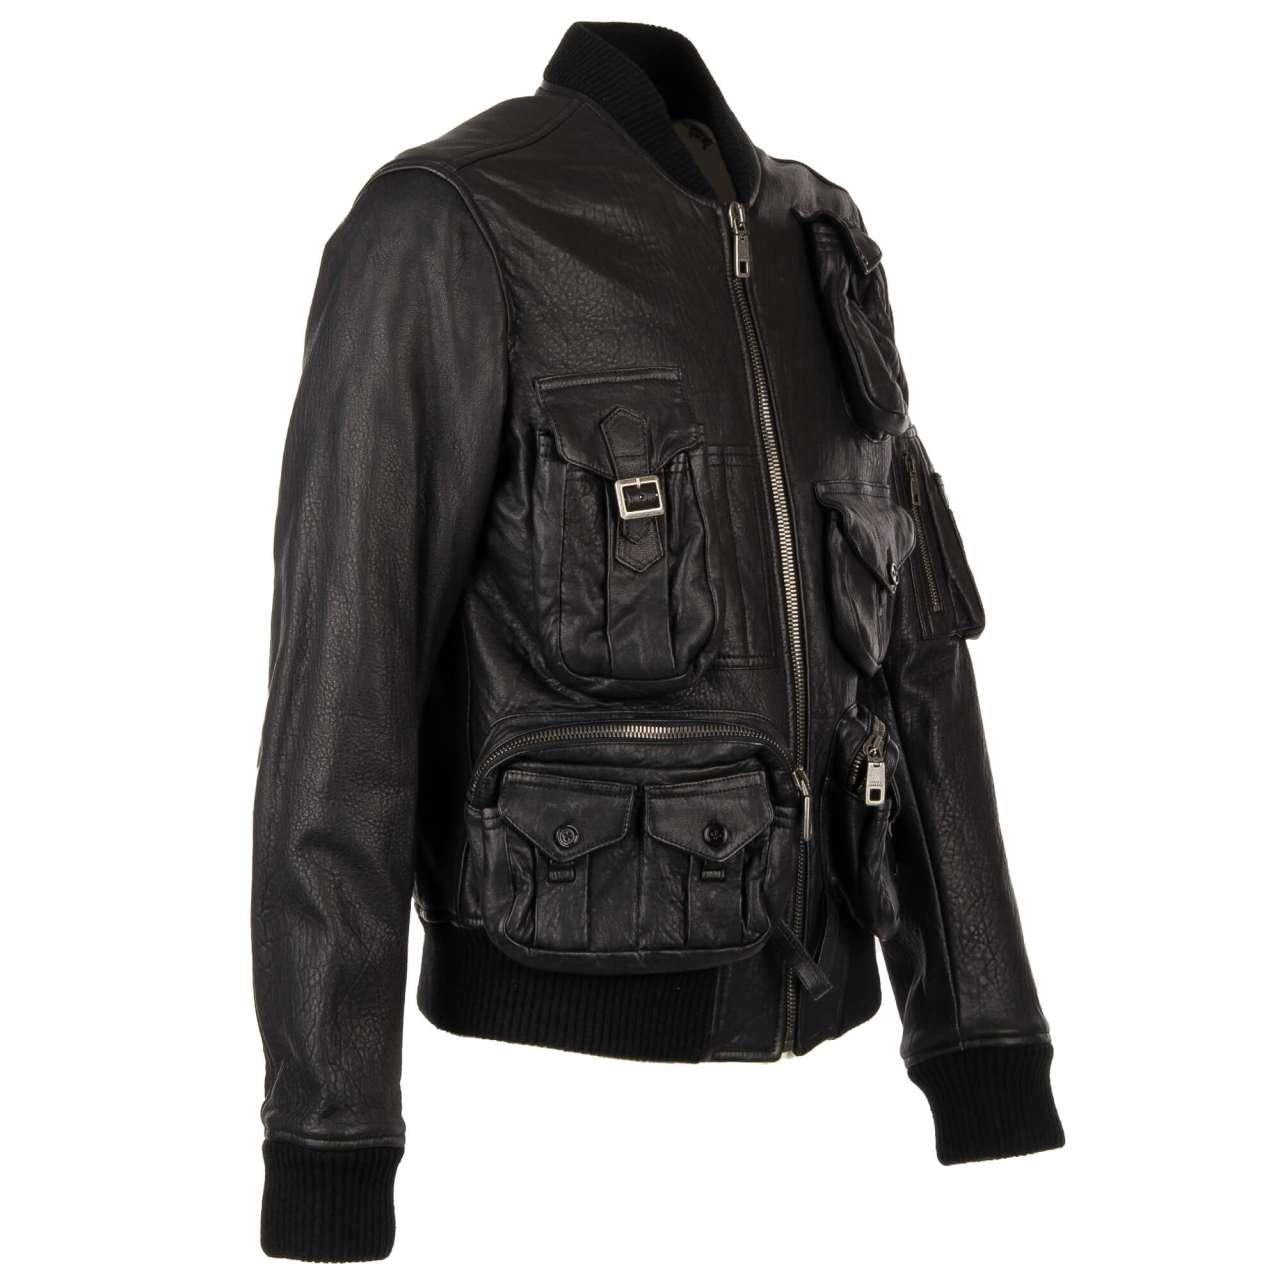 Dolce & Gabbana - Multi-Pocket Military Inspired Nappa Leather Jacket Black 48 In Excellent Condition For Sale In Erkrath, DE